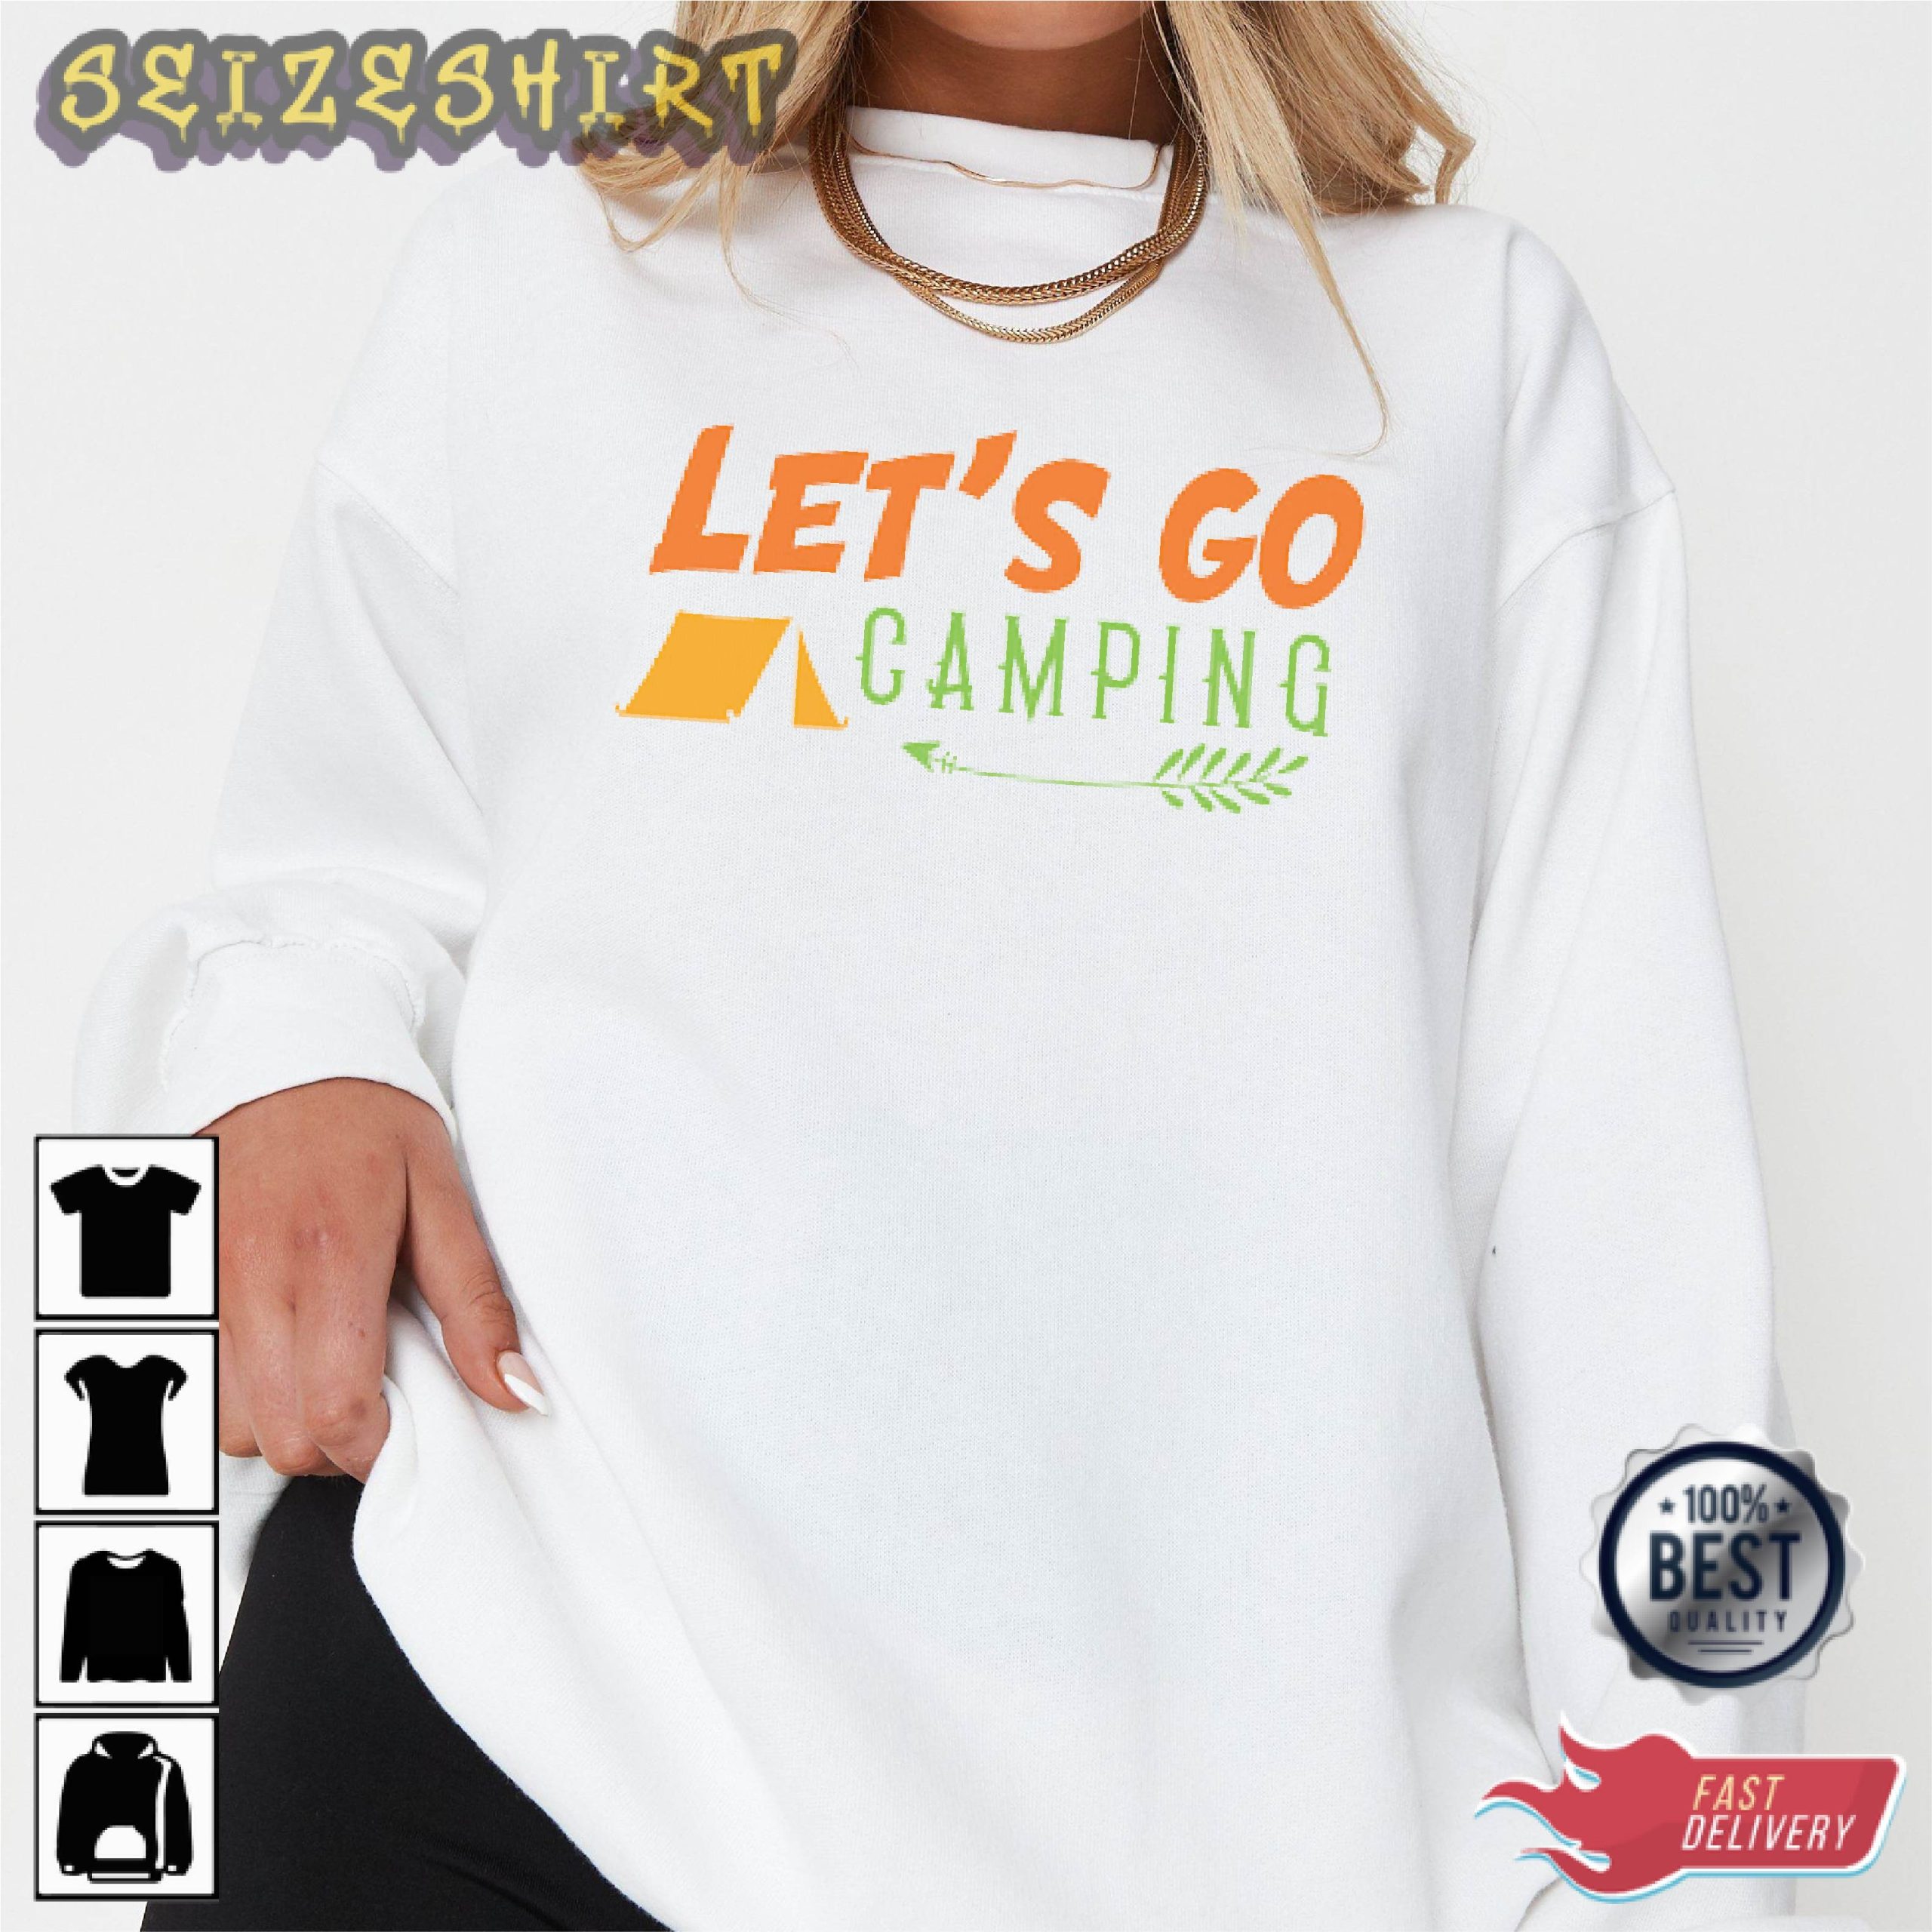 Let's Go Camping - Camping Graphic Tee